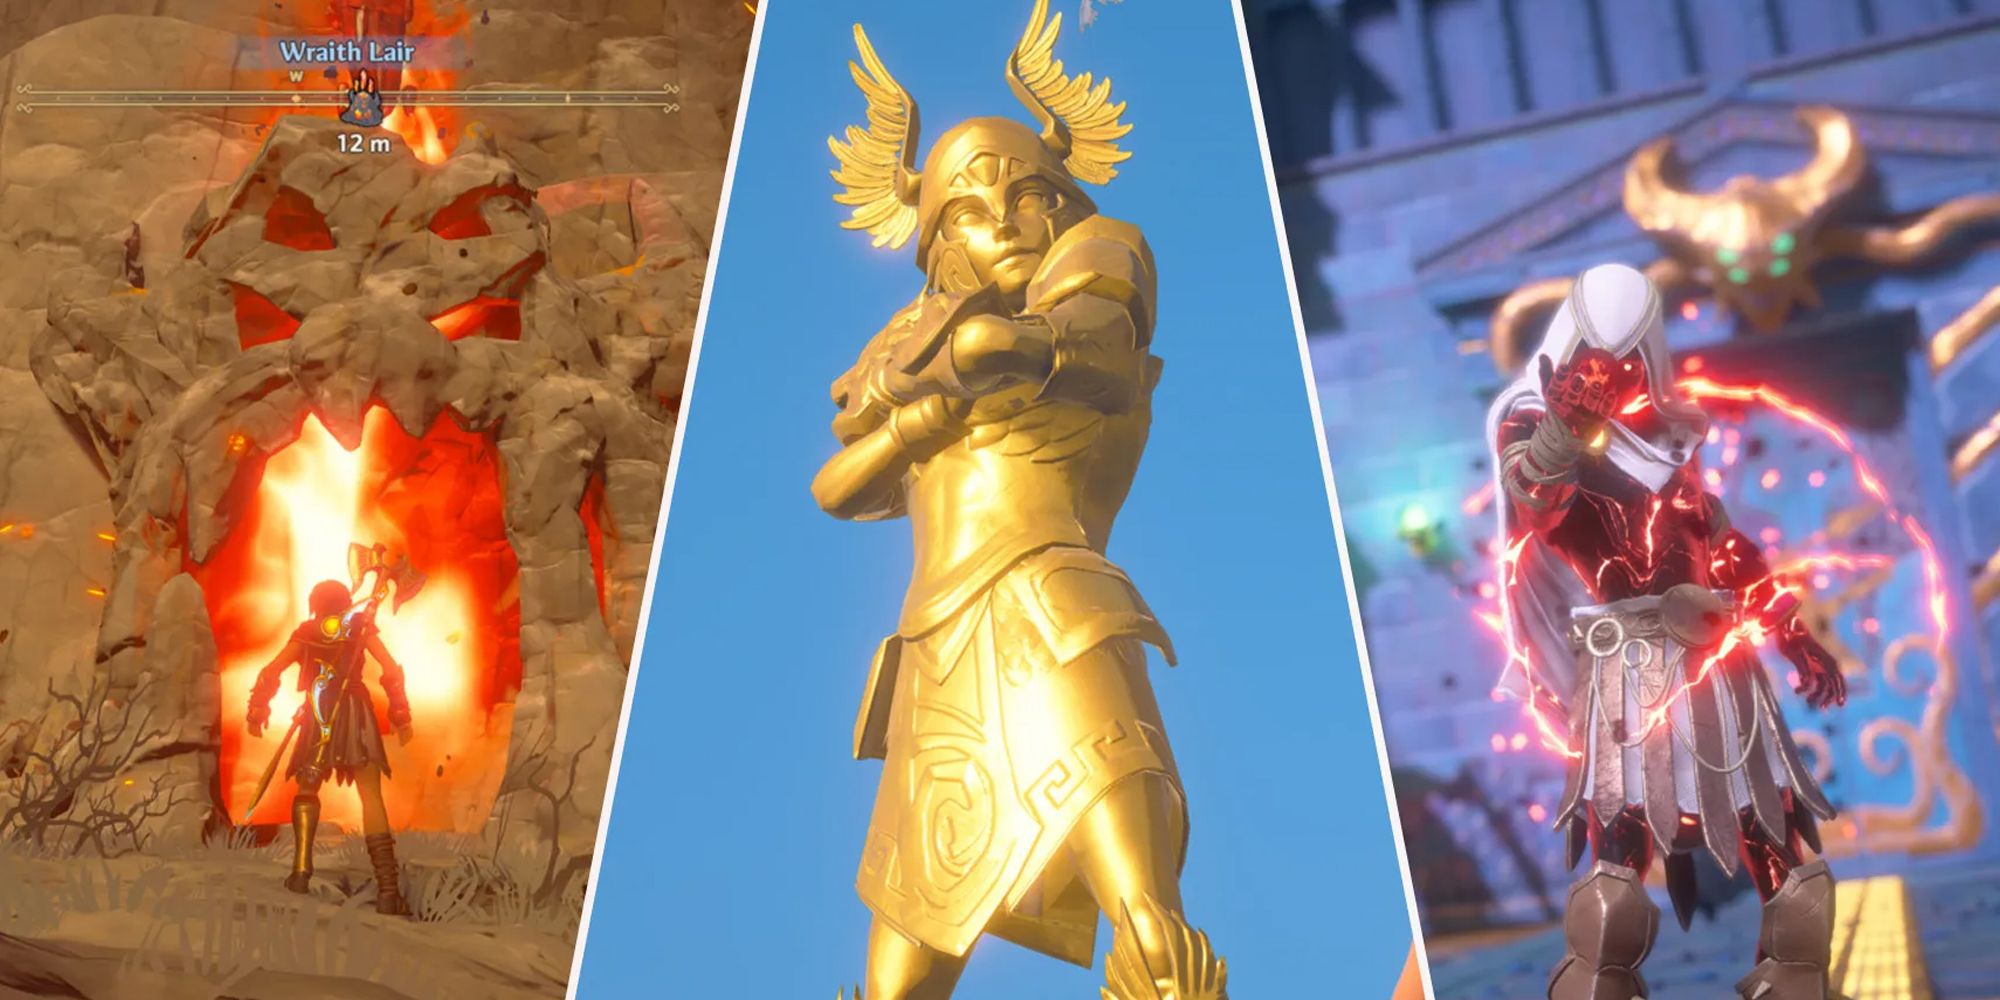 Immortals Fenyx Rising collage of a wraith lair entrance, a golden hero statue, and Odysseus.